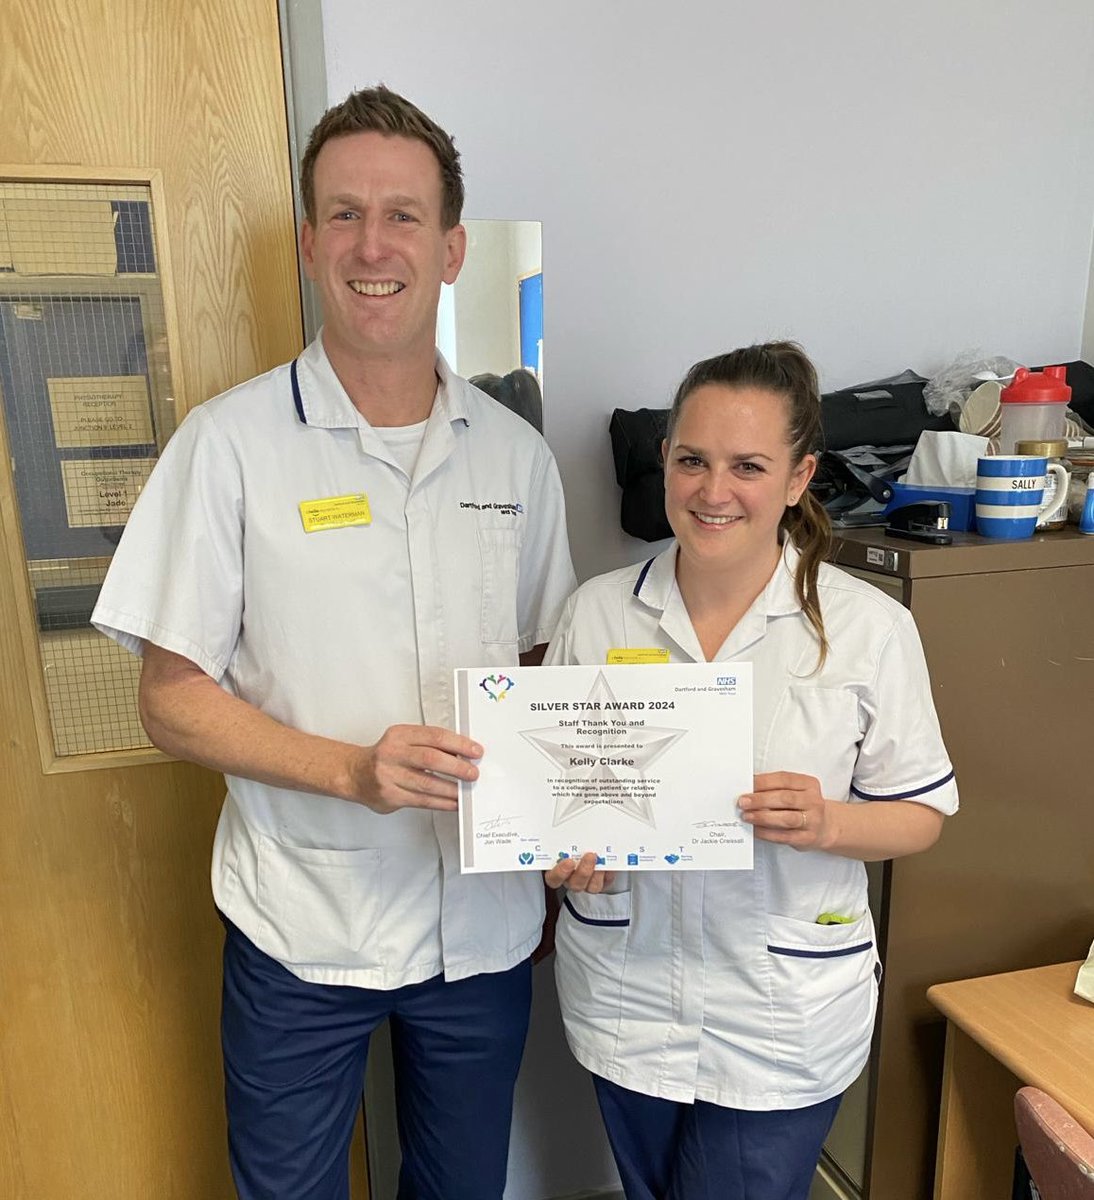 Well done @KellyCPhysio awarded a silver staff award today 🥈 after being nominated by a patient @DGTAHPs @DarentValleyHsp @cazzaroo1984 @di_gambrell @thecsp